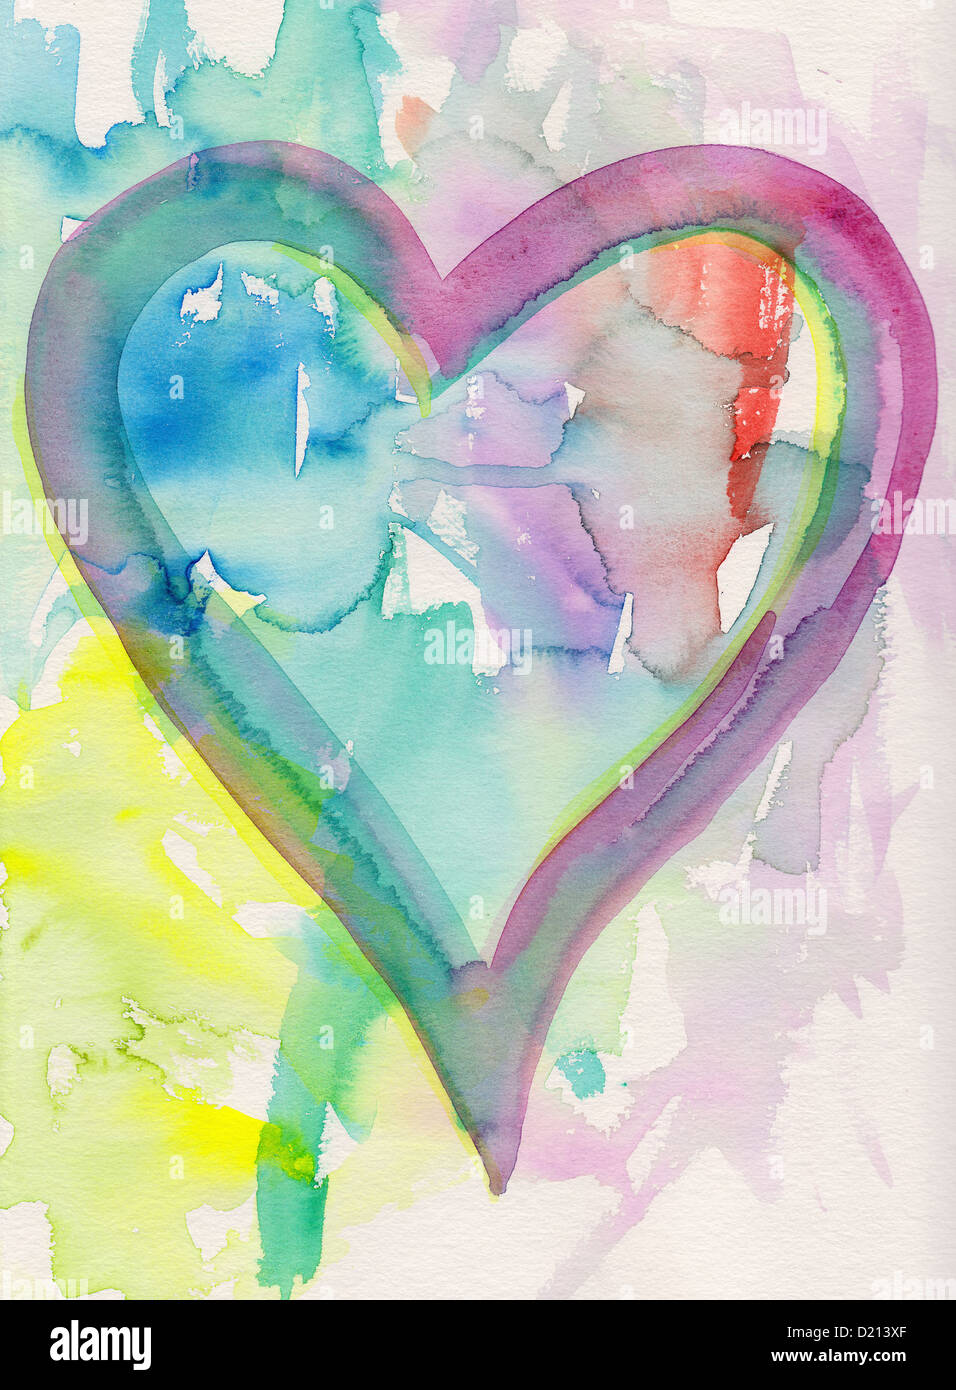 Watercolor painting heart shape on abstract background Stock Photo